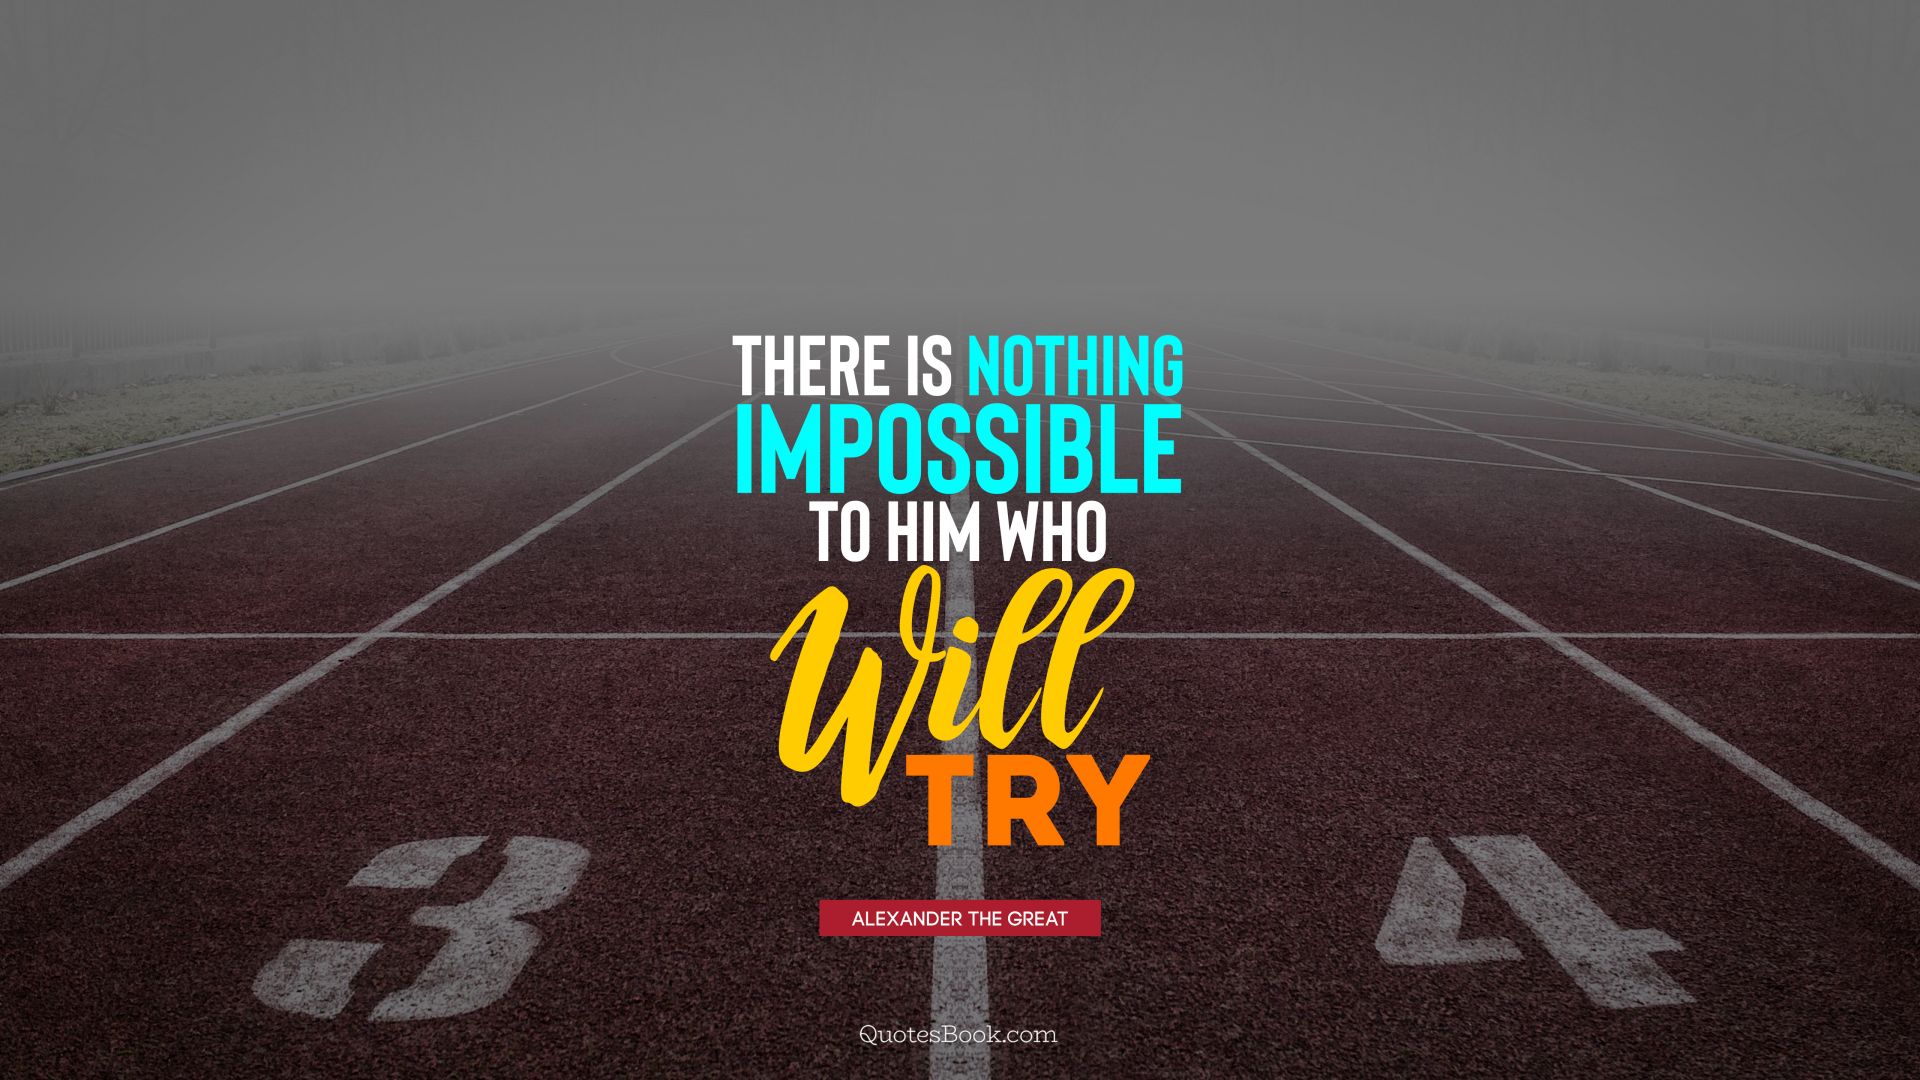 There is nothing impossible to him who will try. - Quote by Alexander the Great